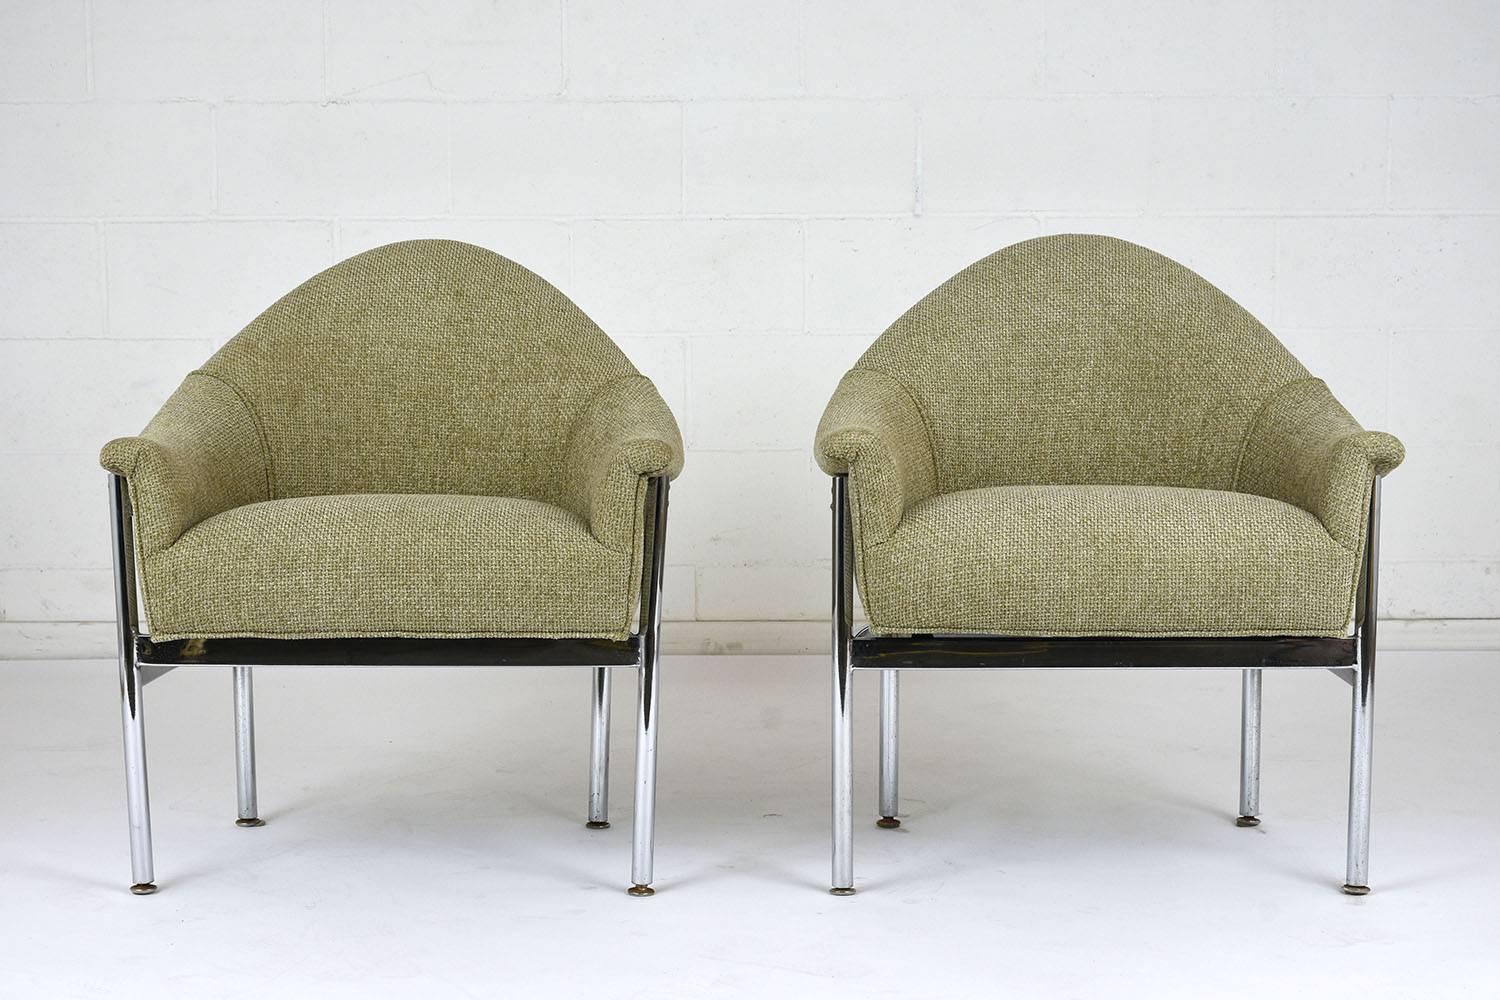 This pair of 1960s Mid-Century Modern-style lounge chairs have been completely restored with new upholstery in a sage green fabric with piping trim details. The chairs feature a sleek chrome base that compliments the comfortable seats. This pair of